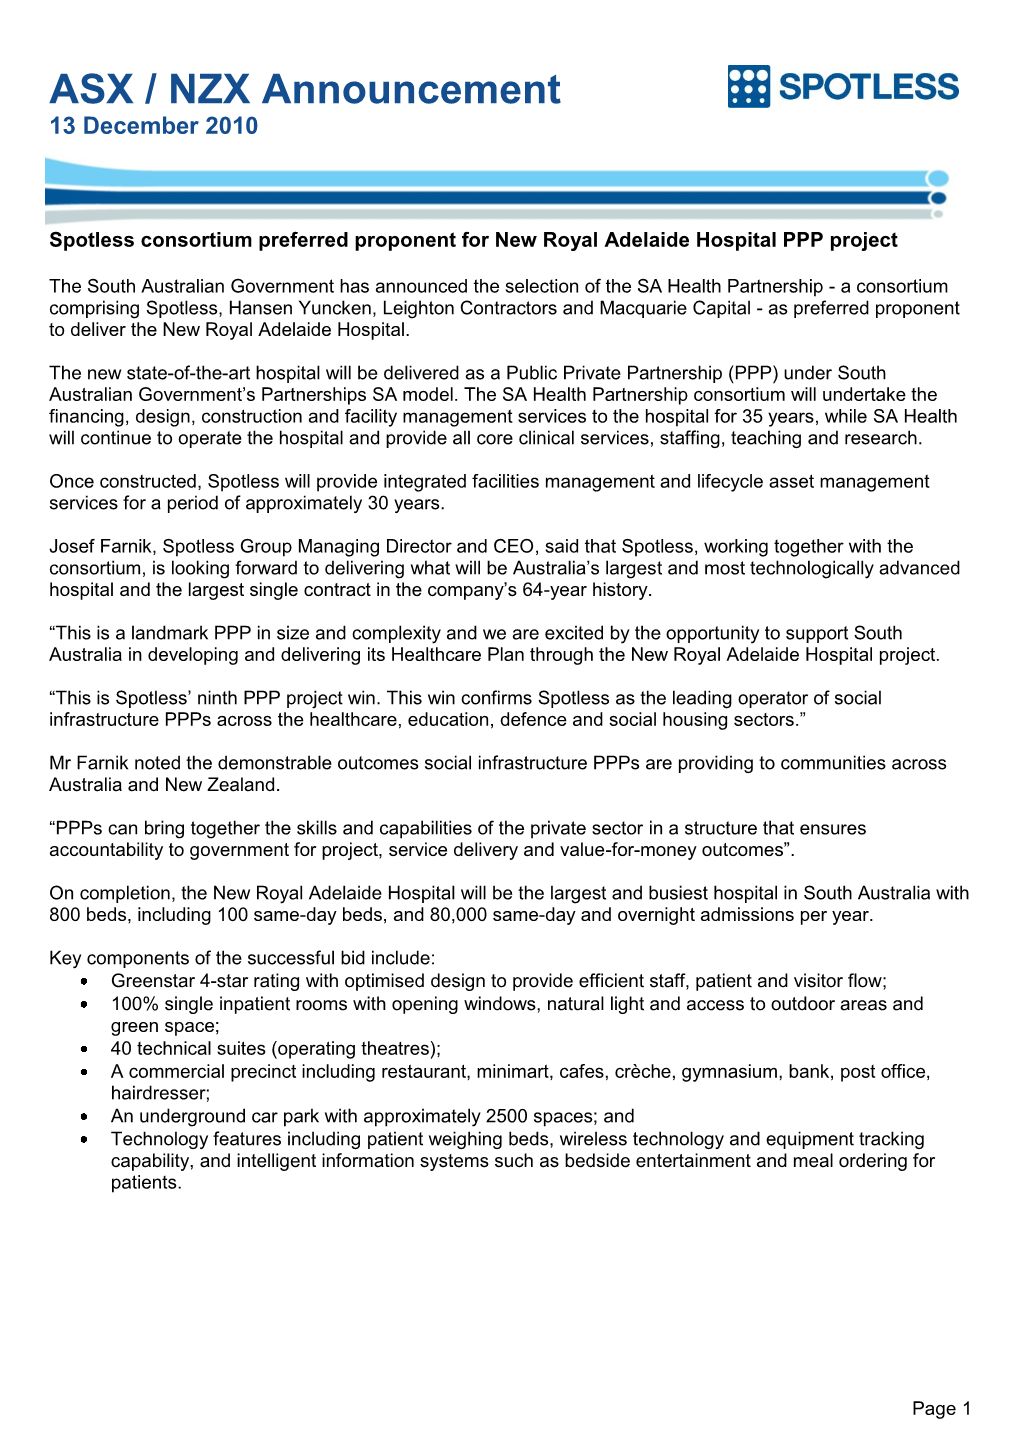 Spotless Consortium Preferred Proponent for New Royal Adelaide Hospital PPP Project